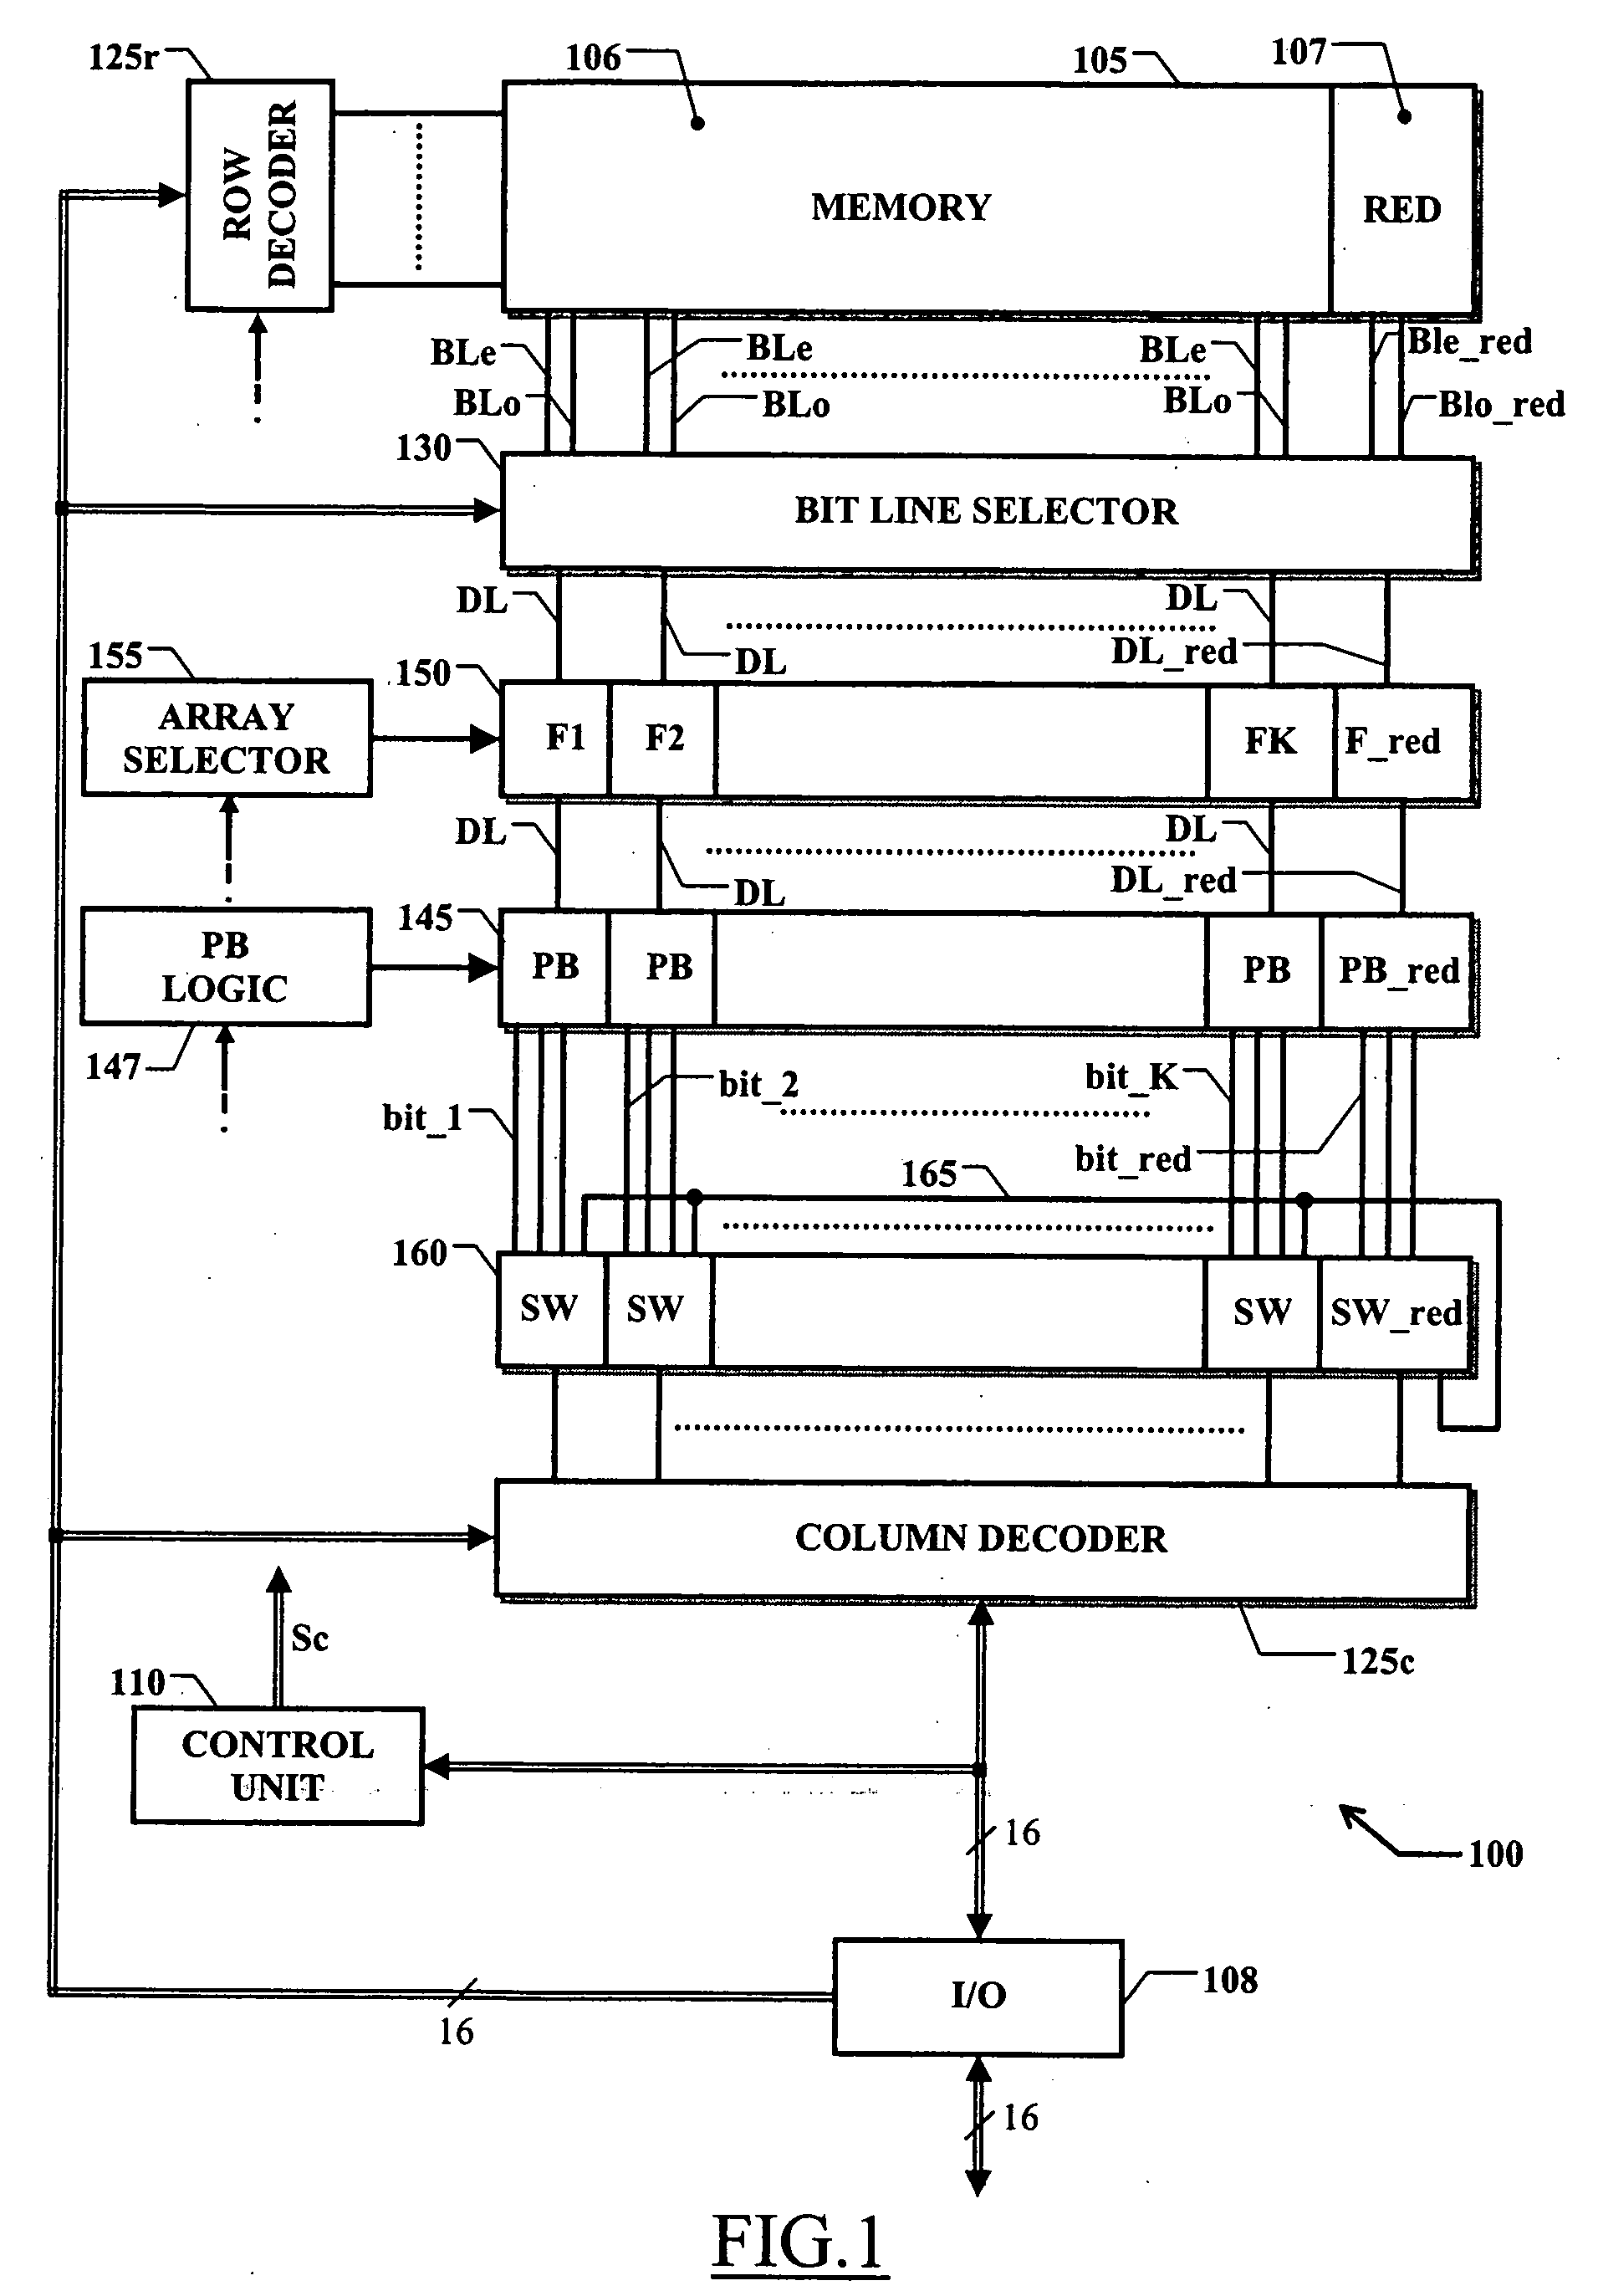 Programmable memory device with an improved redundancy structure